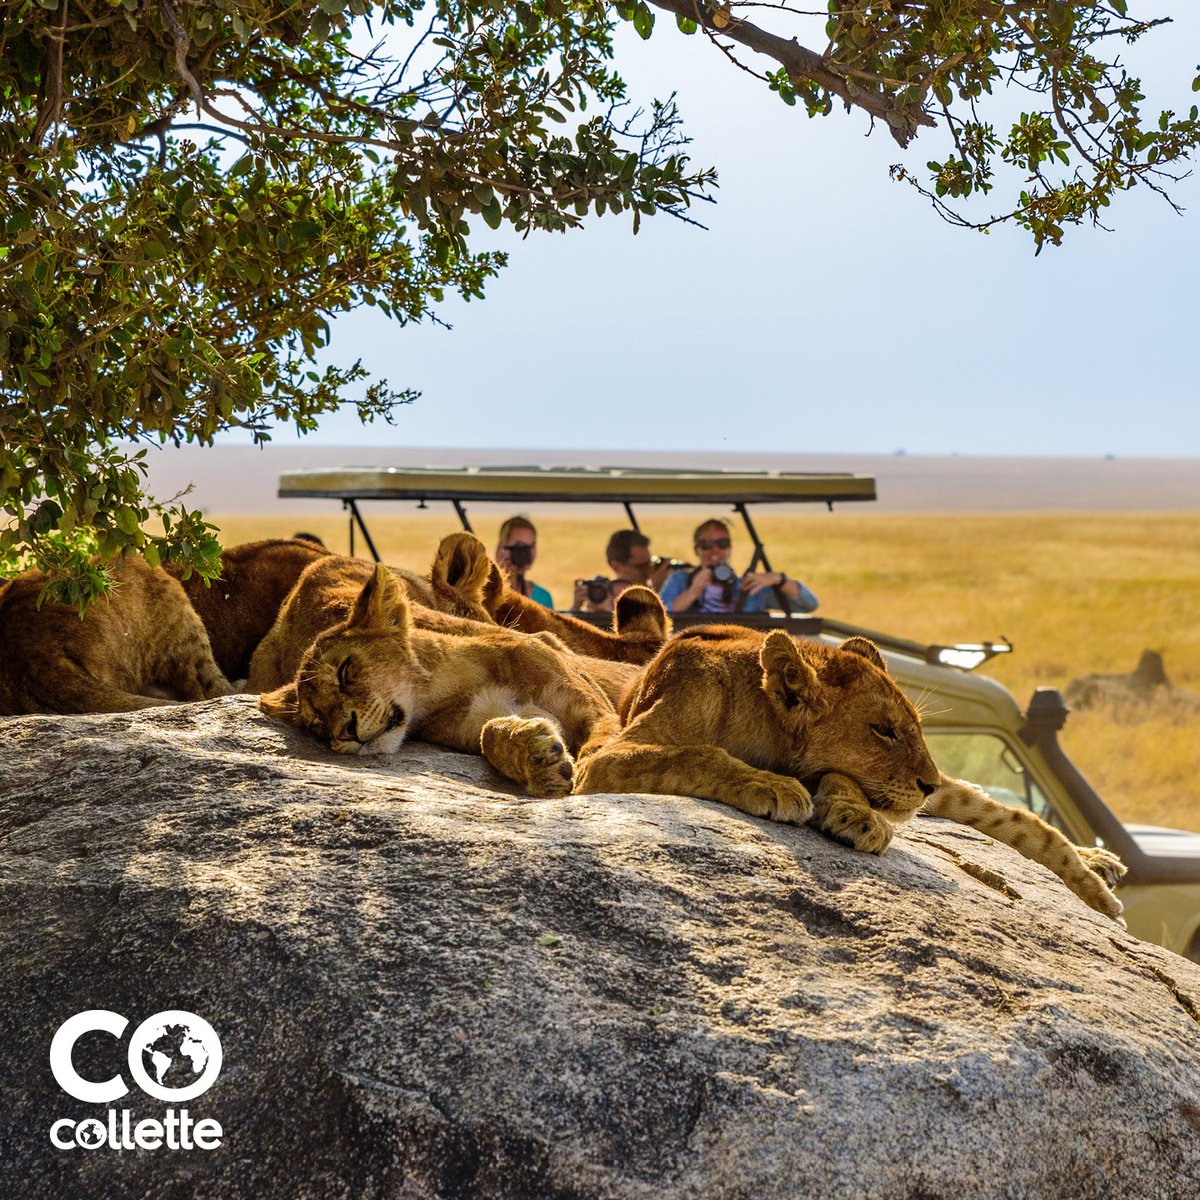 From African safaris to the immersive culture of Japan – this is your last chance to save big on Collette tours worldwide. Book by April 15th. ​ Book now & save up to 20%*​ *Restrictions apply.​ bit.ly/3U7UAVT